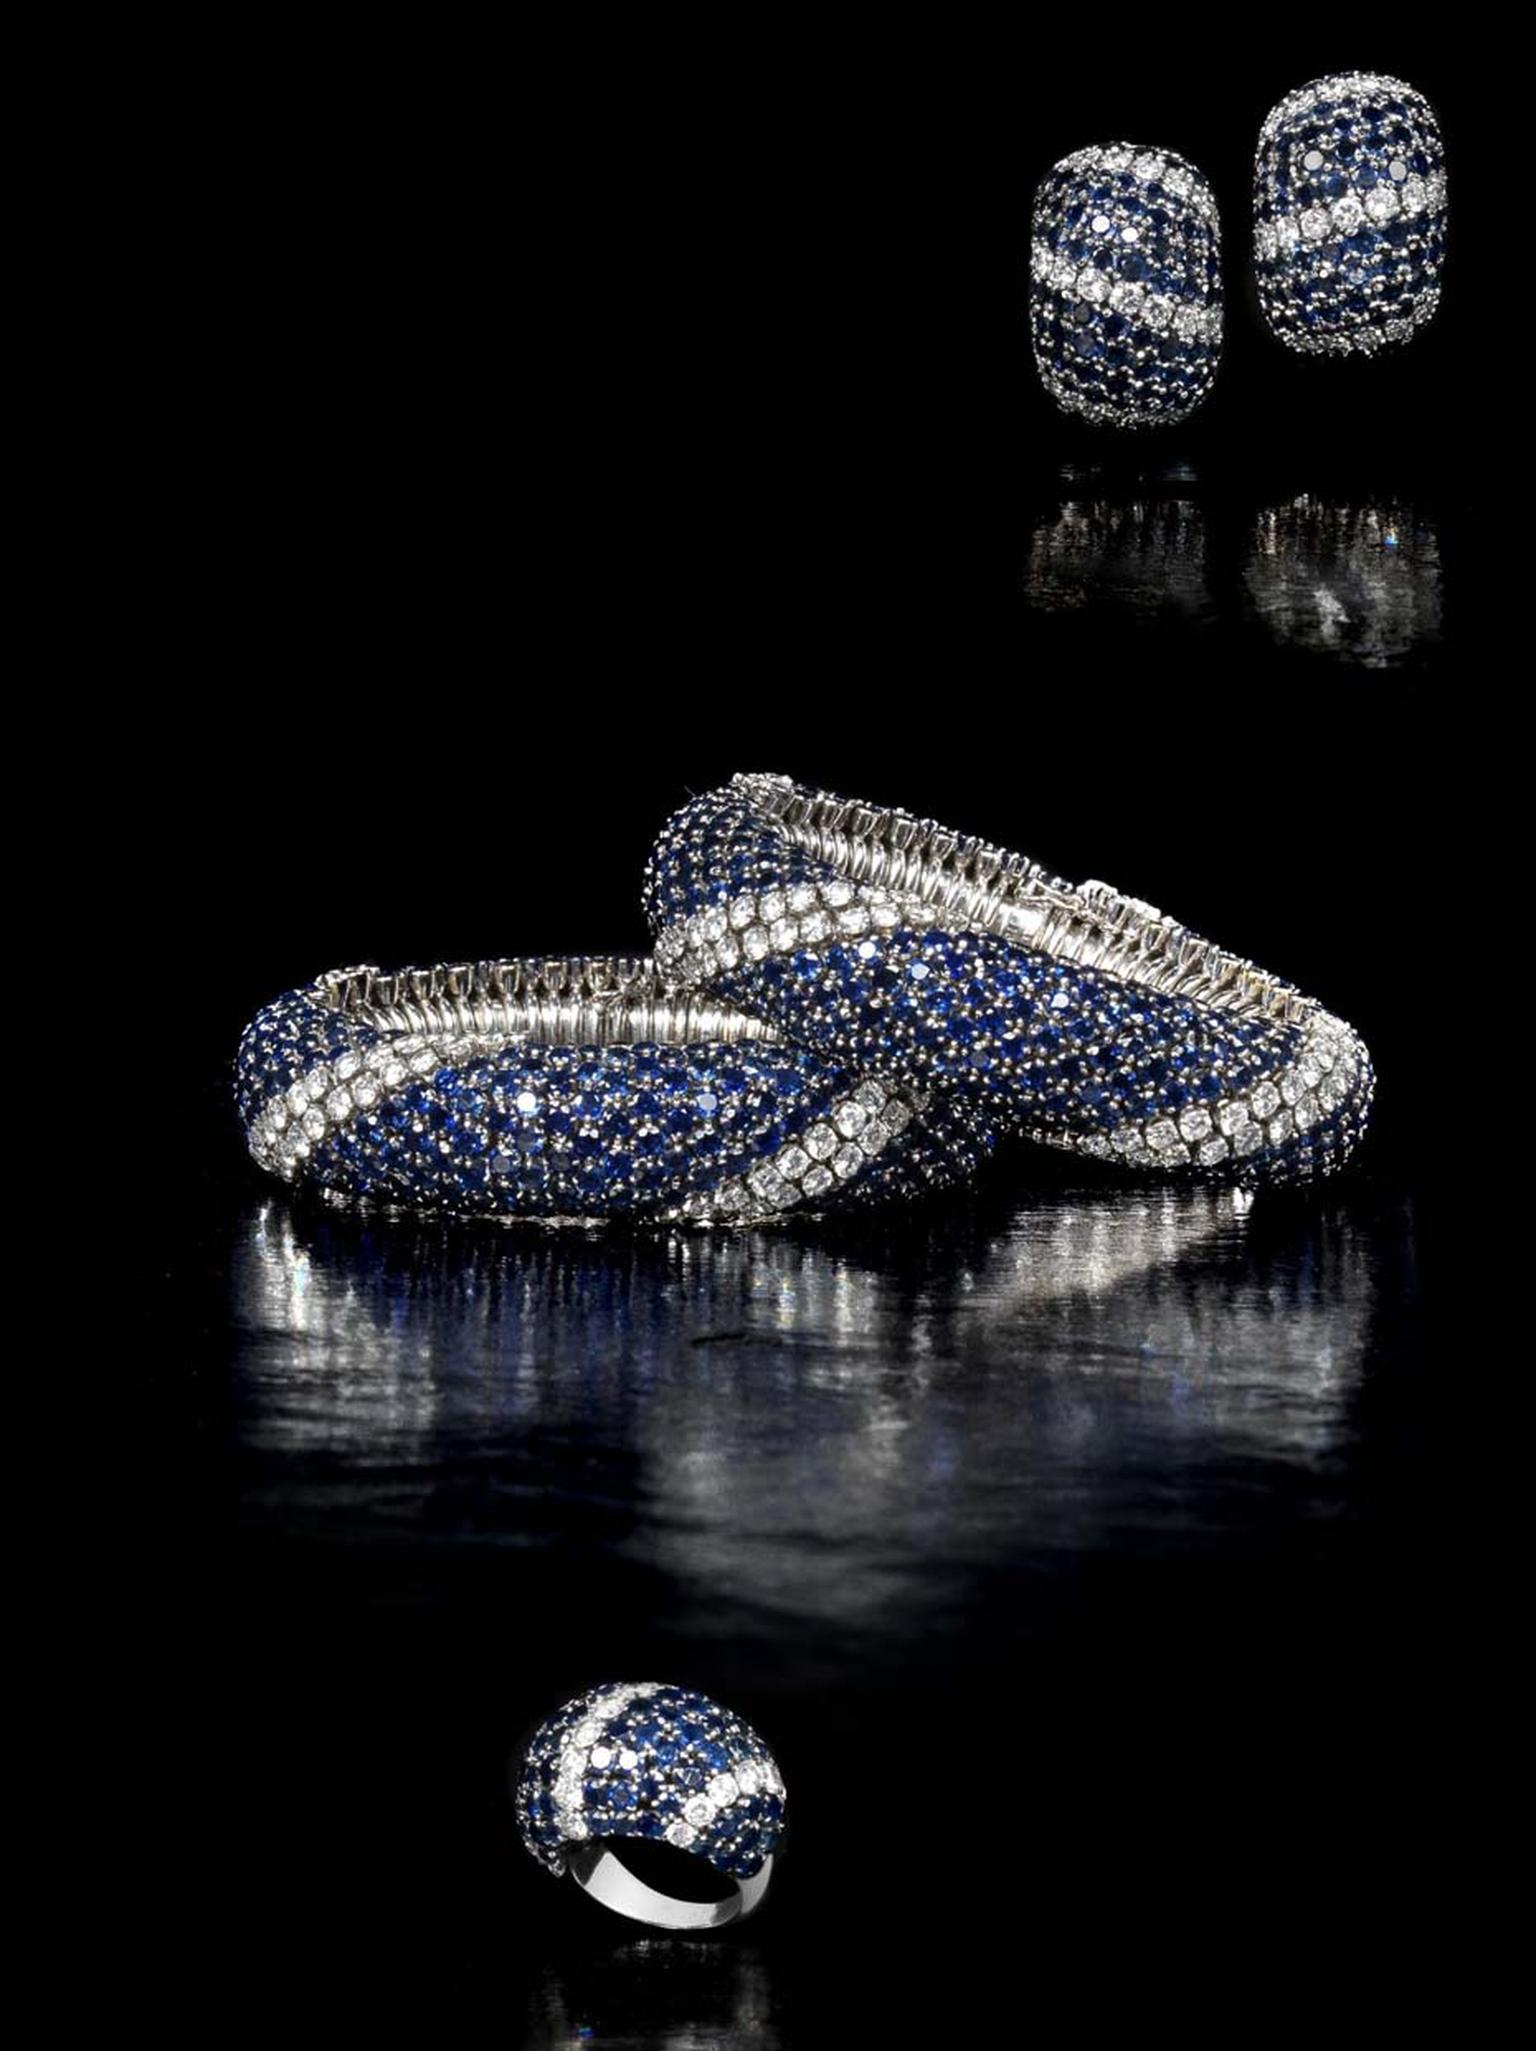 A Van Cleef & Arpels sapphire and diamond “lawn” suite, comprising a choker and bracelet sold during the Bonhams sale for £146,500.